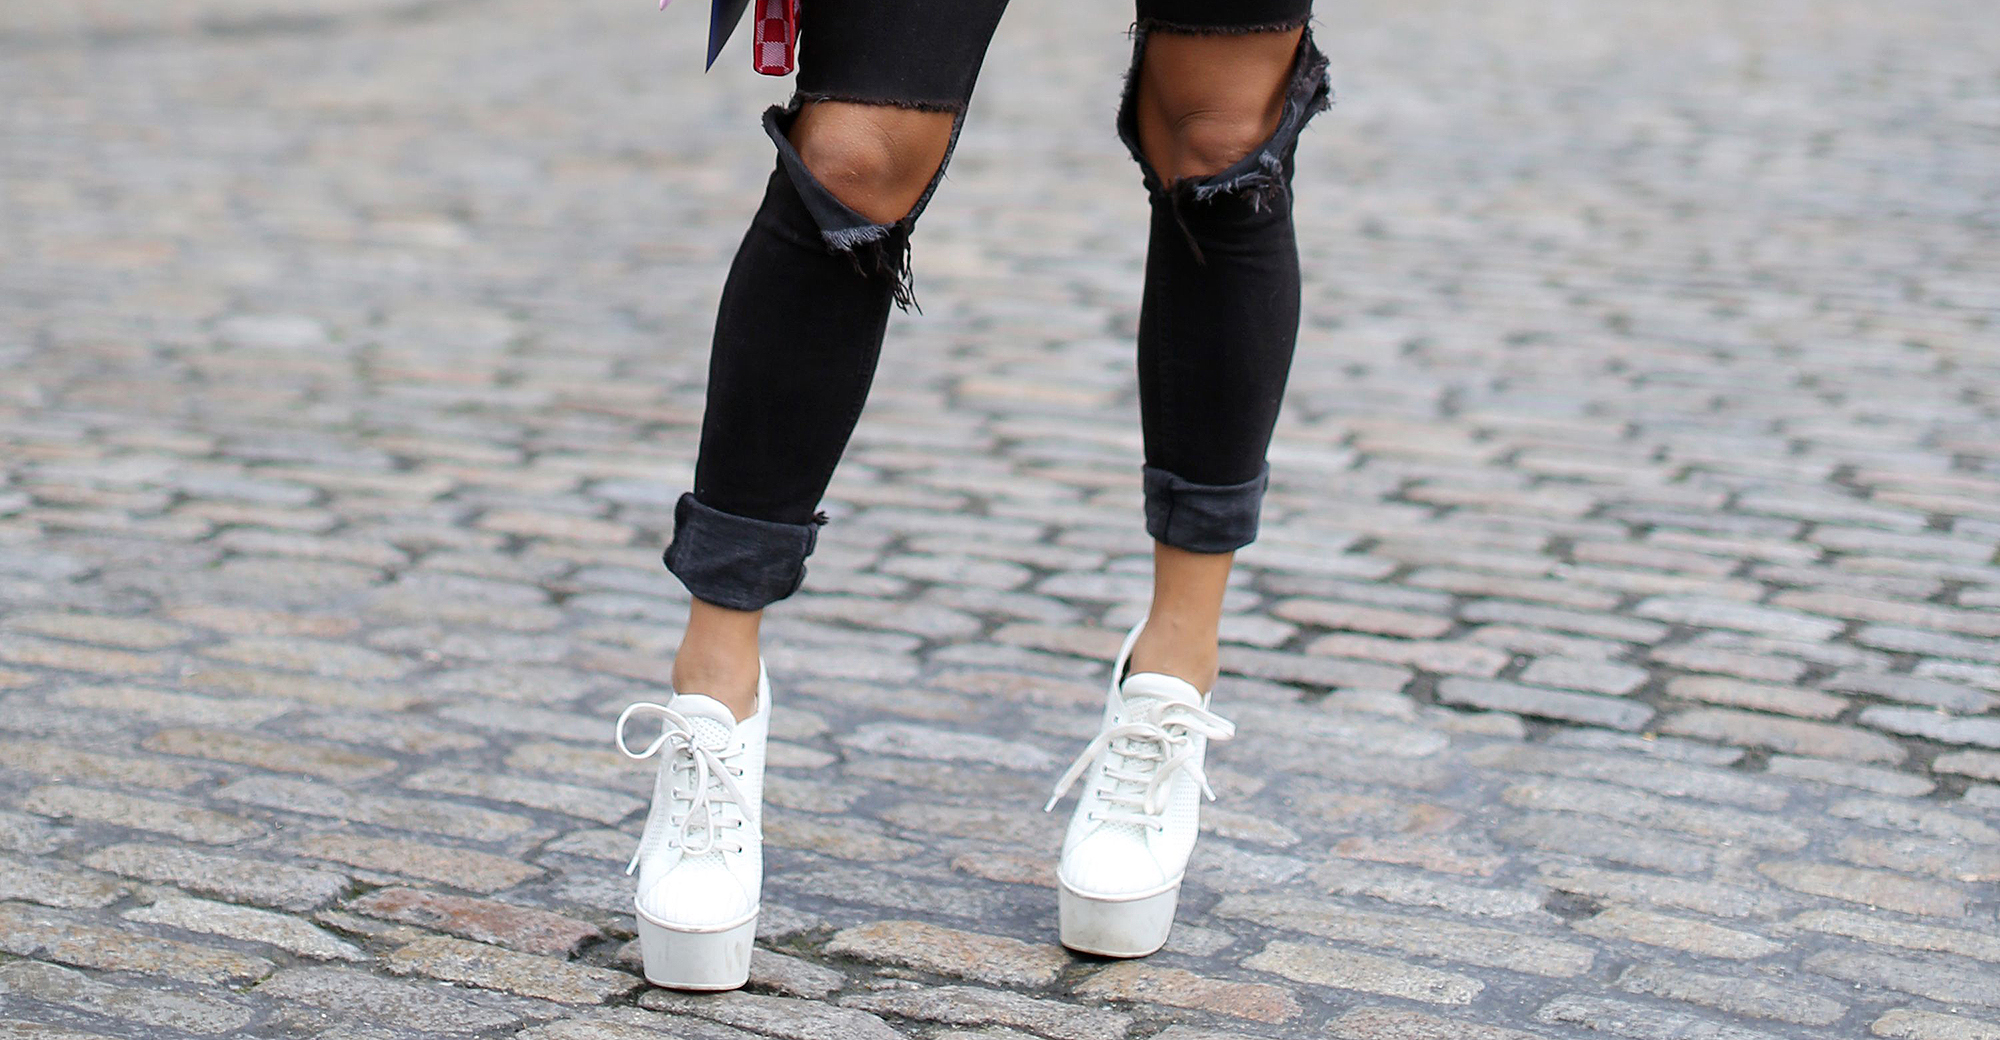 Our Picks: The Best Platform Sneakers to Suit Your Style